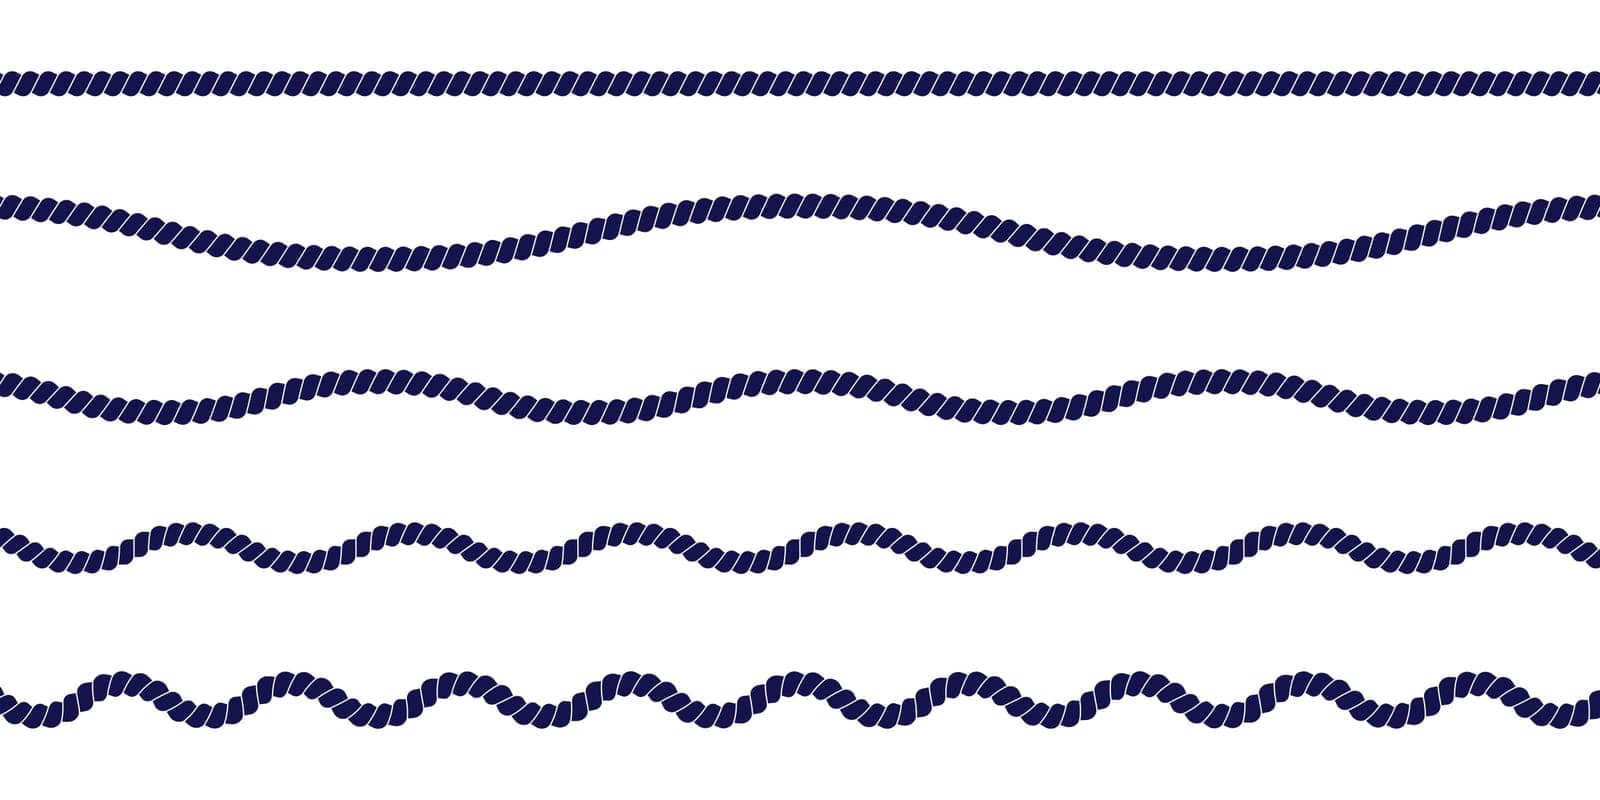 Different straight and wavy rope borders. Cord, thread, cable, twine, jute isolated on white background. Design elements on marine, sailor, yacht, nautical theme. Vector flat illustration.